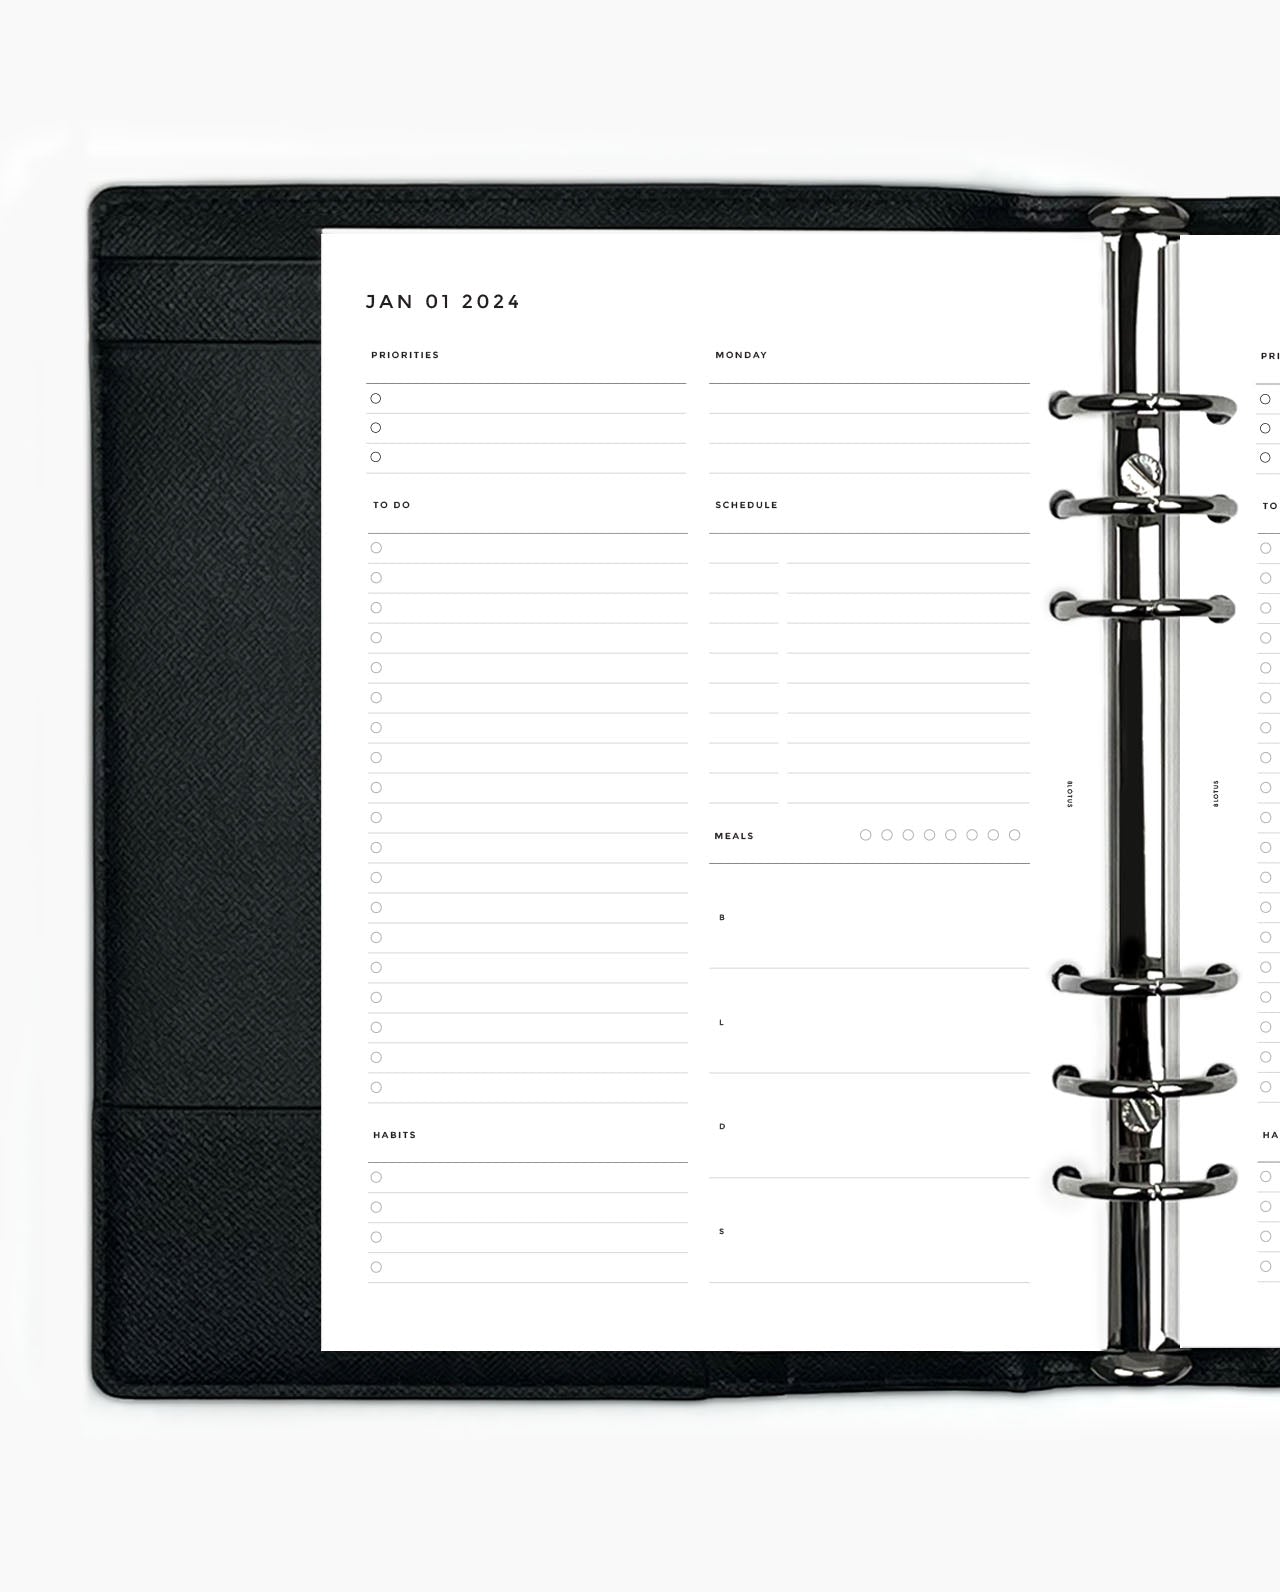 MN040 - 2024 Daily Meals & Habits Planner Inserts - DO1P